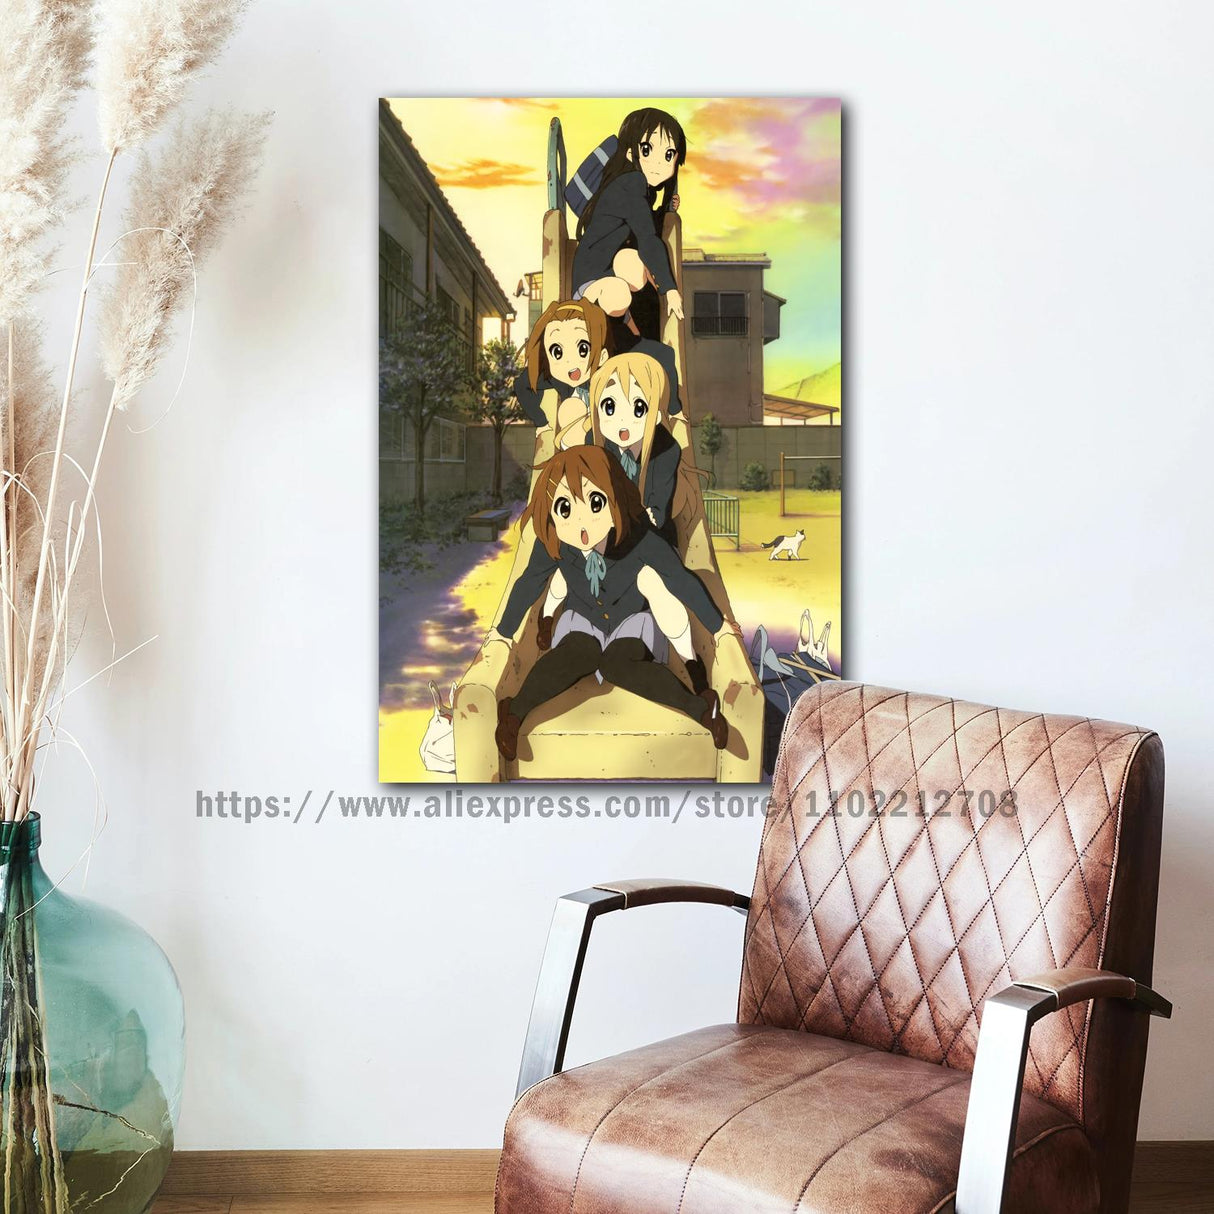 k-on anime Decorative Canvas 24x36 Posters Room Bar Cafe Decor Gift Print Art Wall Paintings, everythinganimee